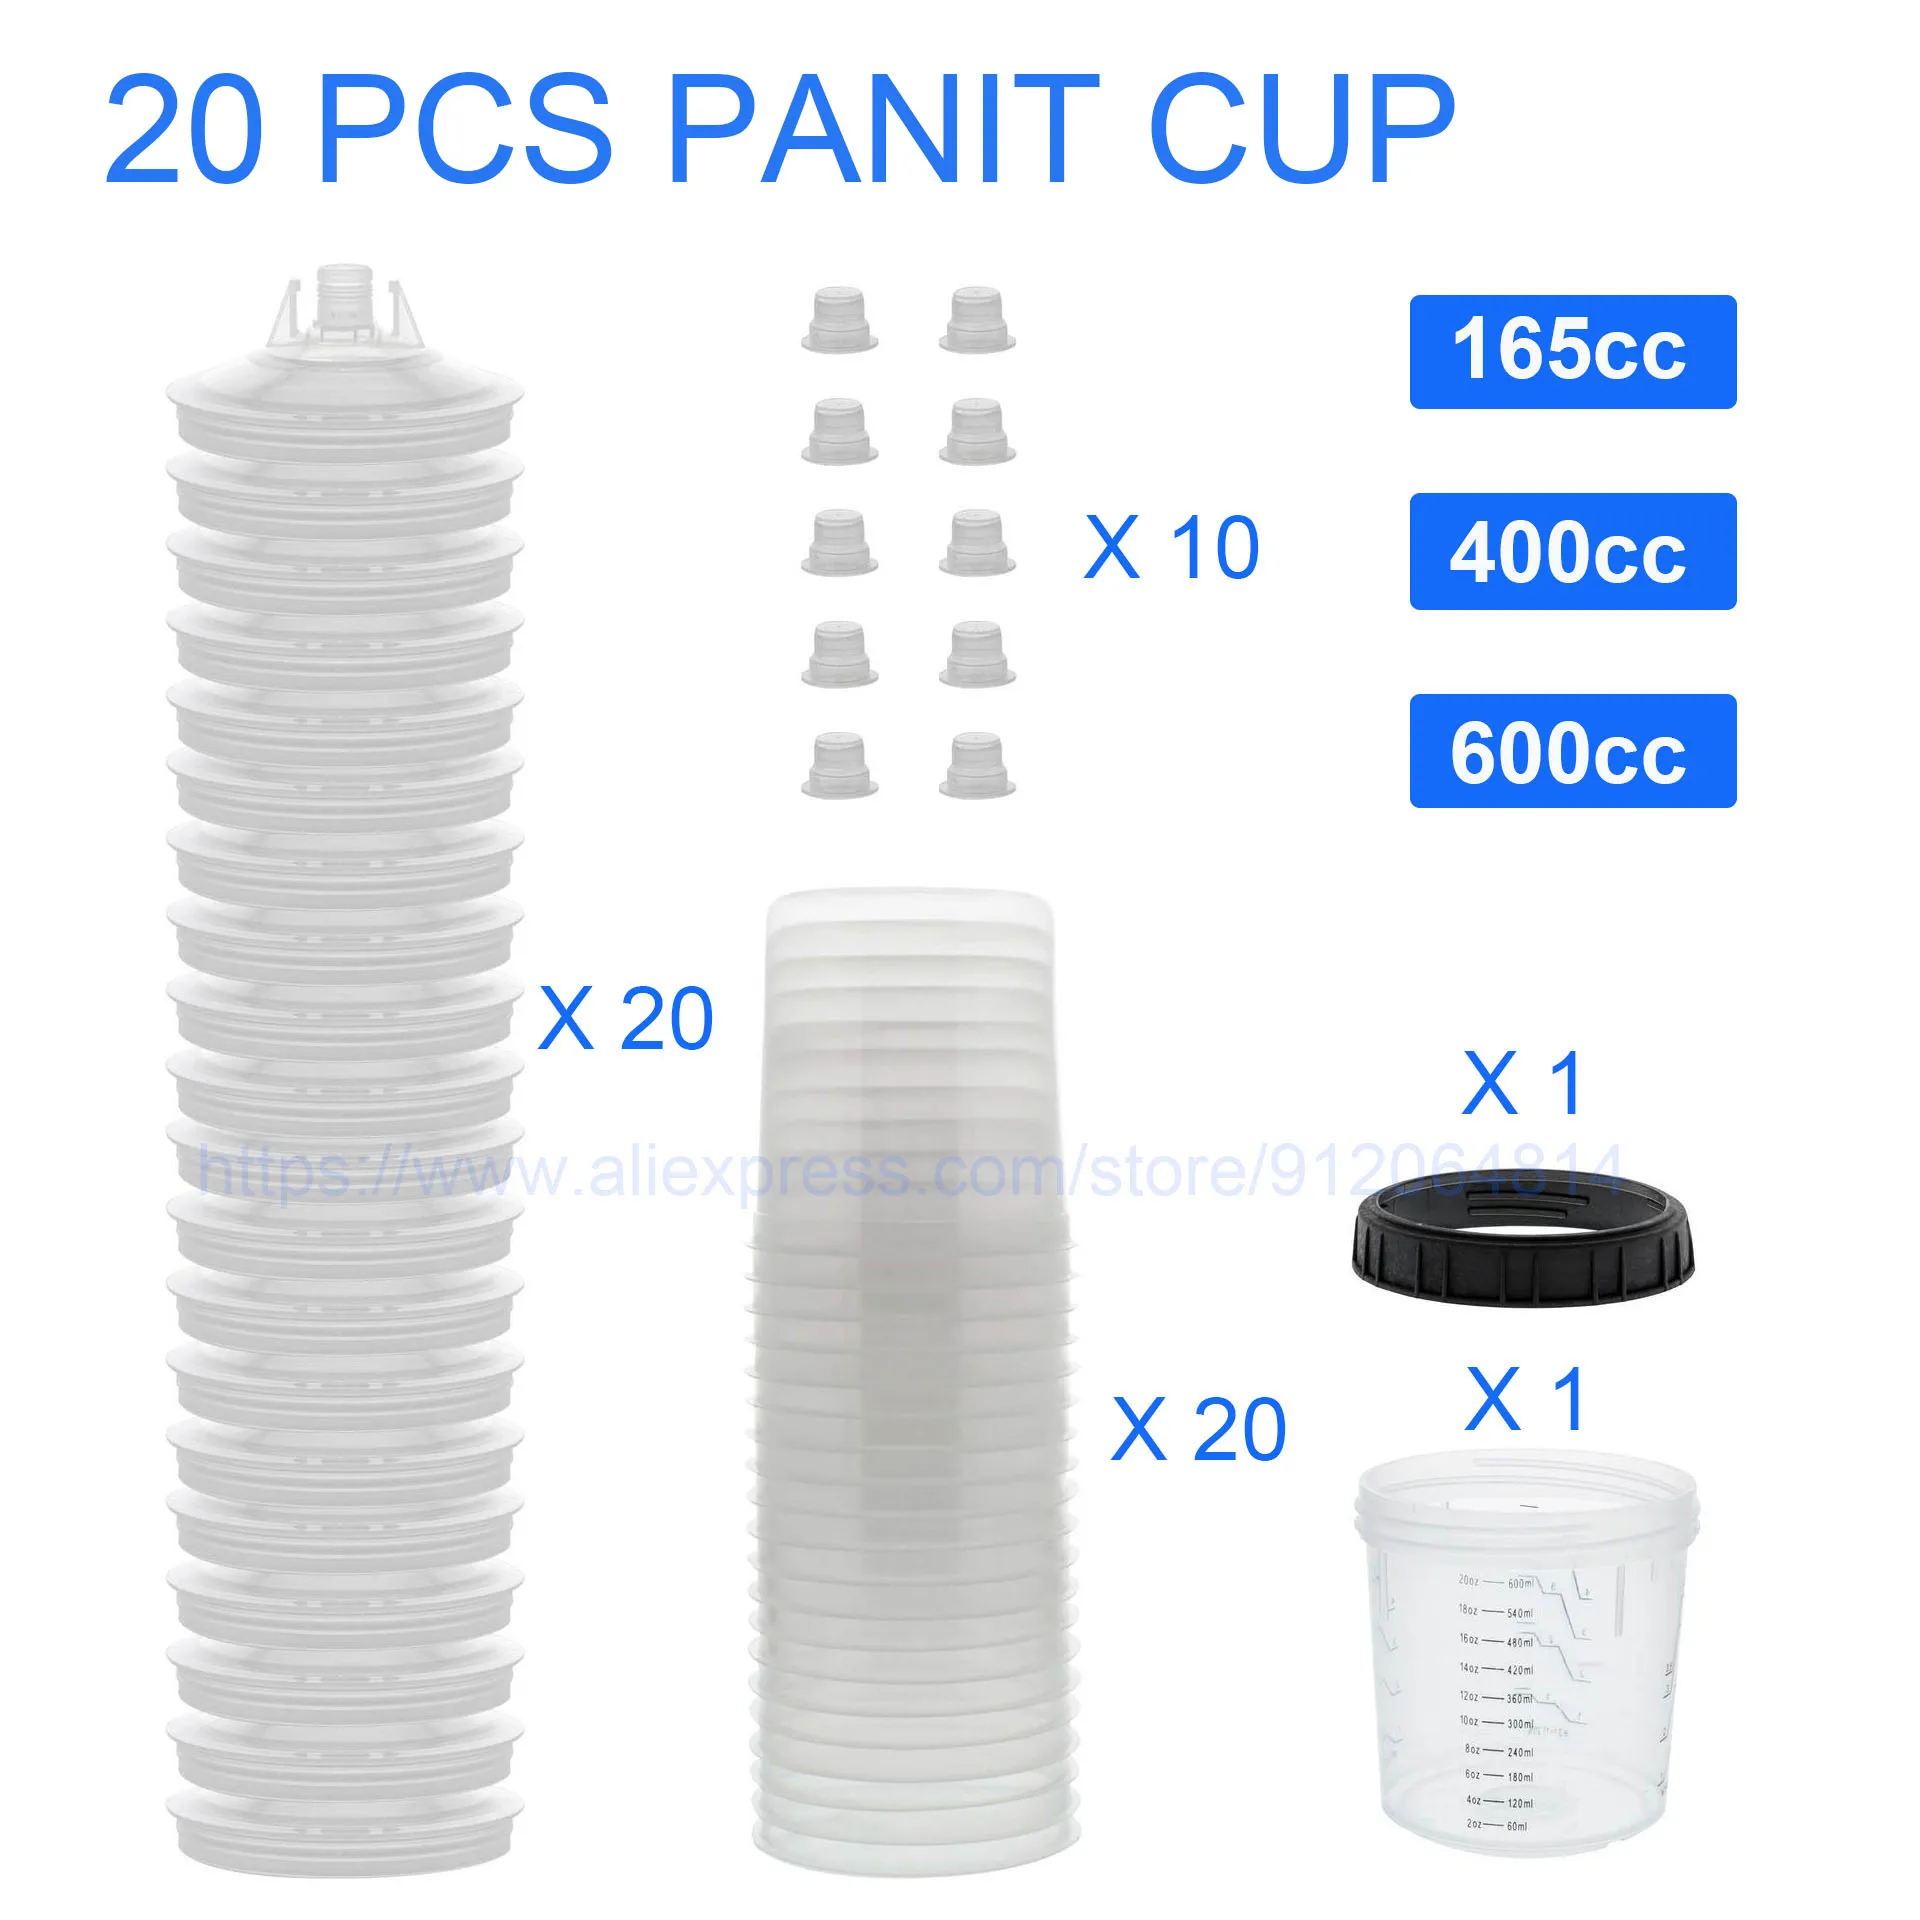 1pcs Plastic Paint Mixing Cups 385ml 750ml 1400ml 2300ml Paint Mixing  Calibrated Cup For Accurate Mixing Of Paint And Liquids - AliExpress